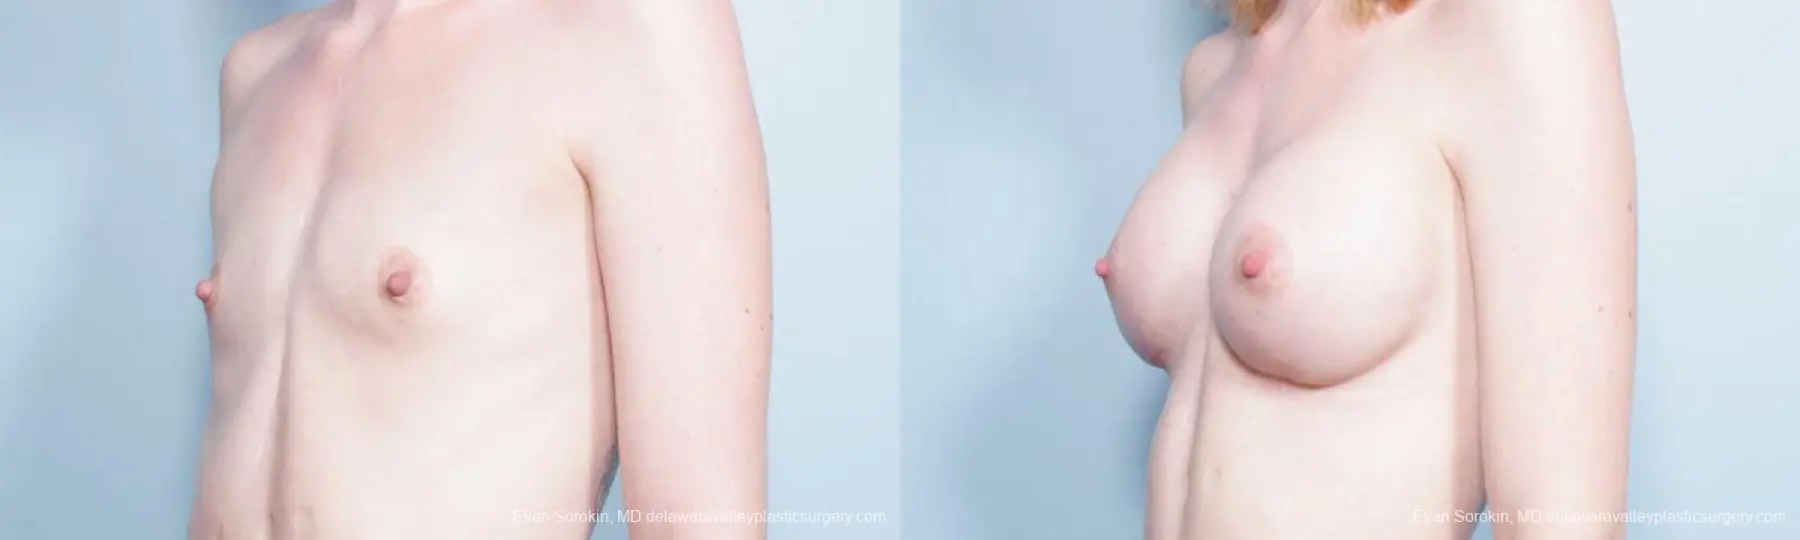 Philadelphia Breast Augmentation 9300 - Before and After 4